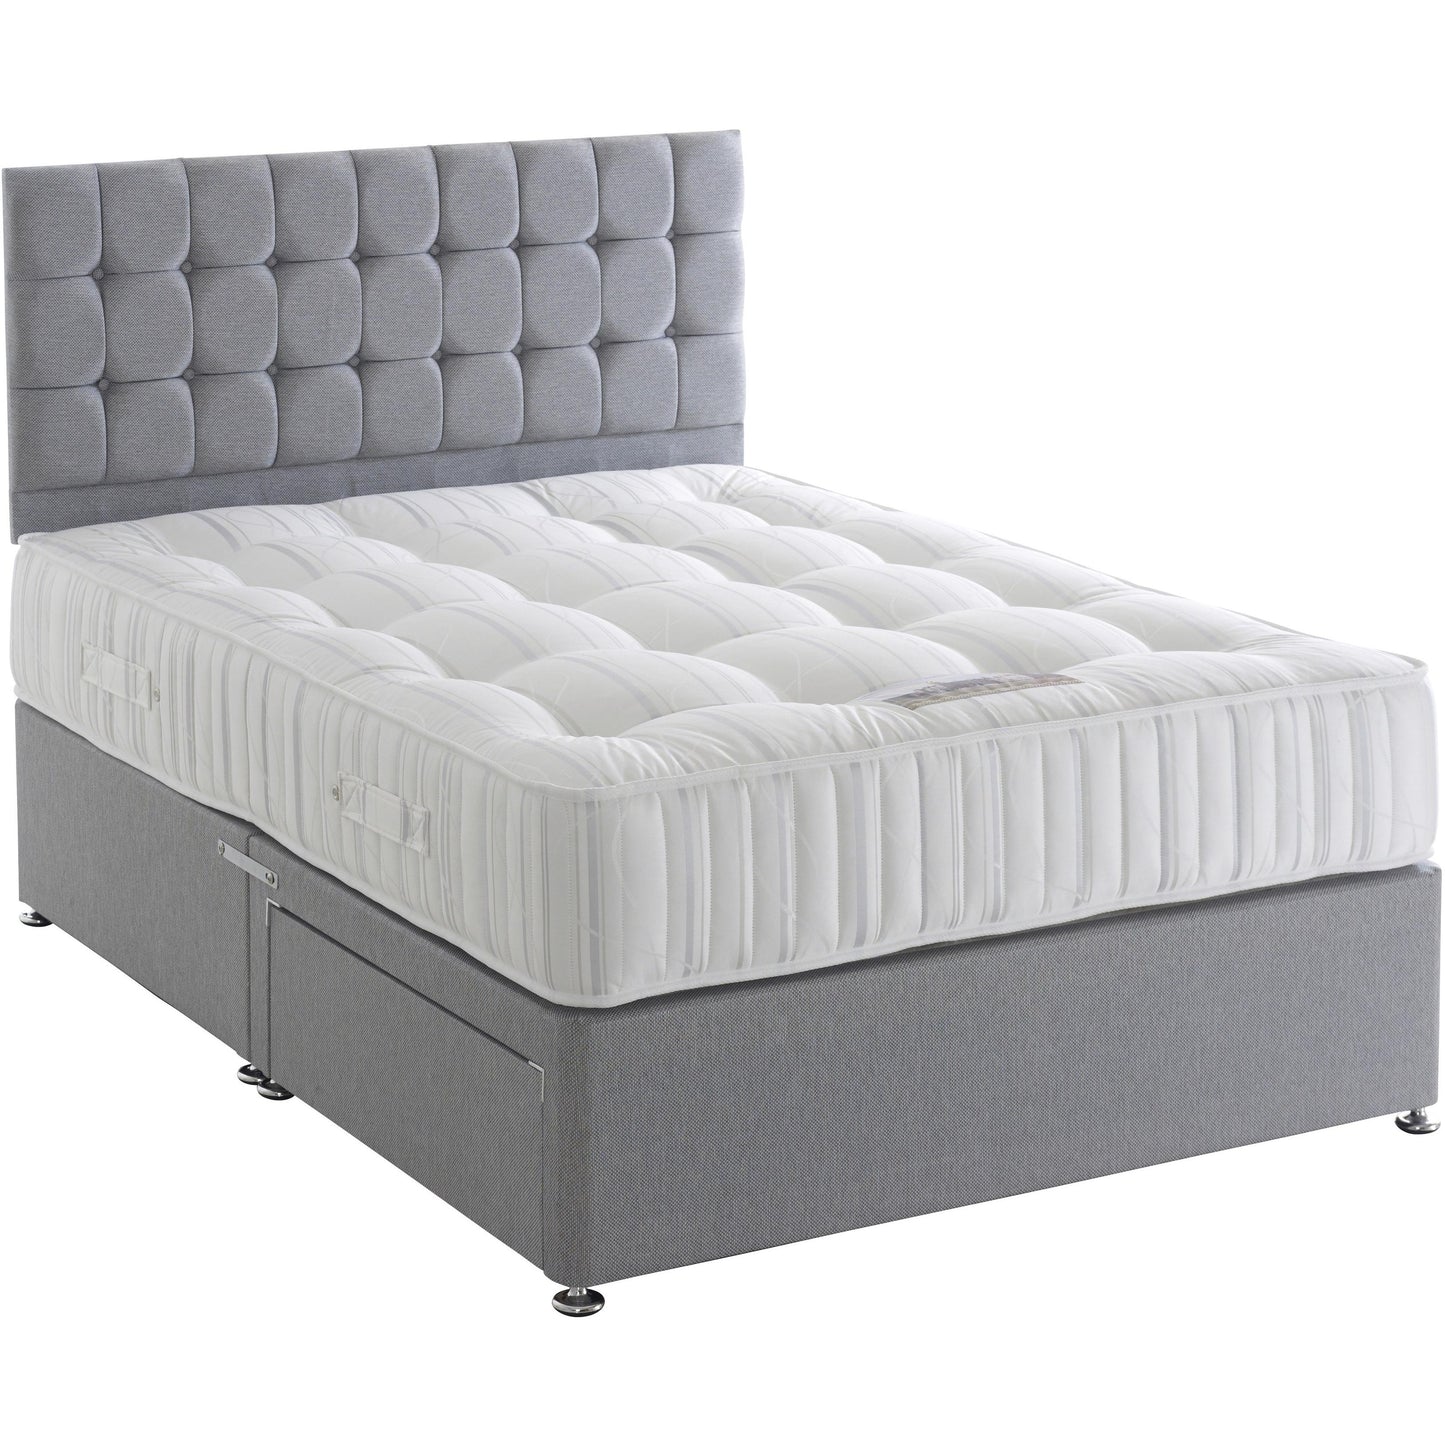 Balmoral by Shop Beds